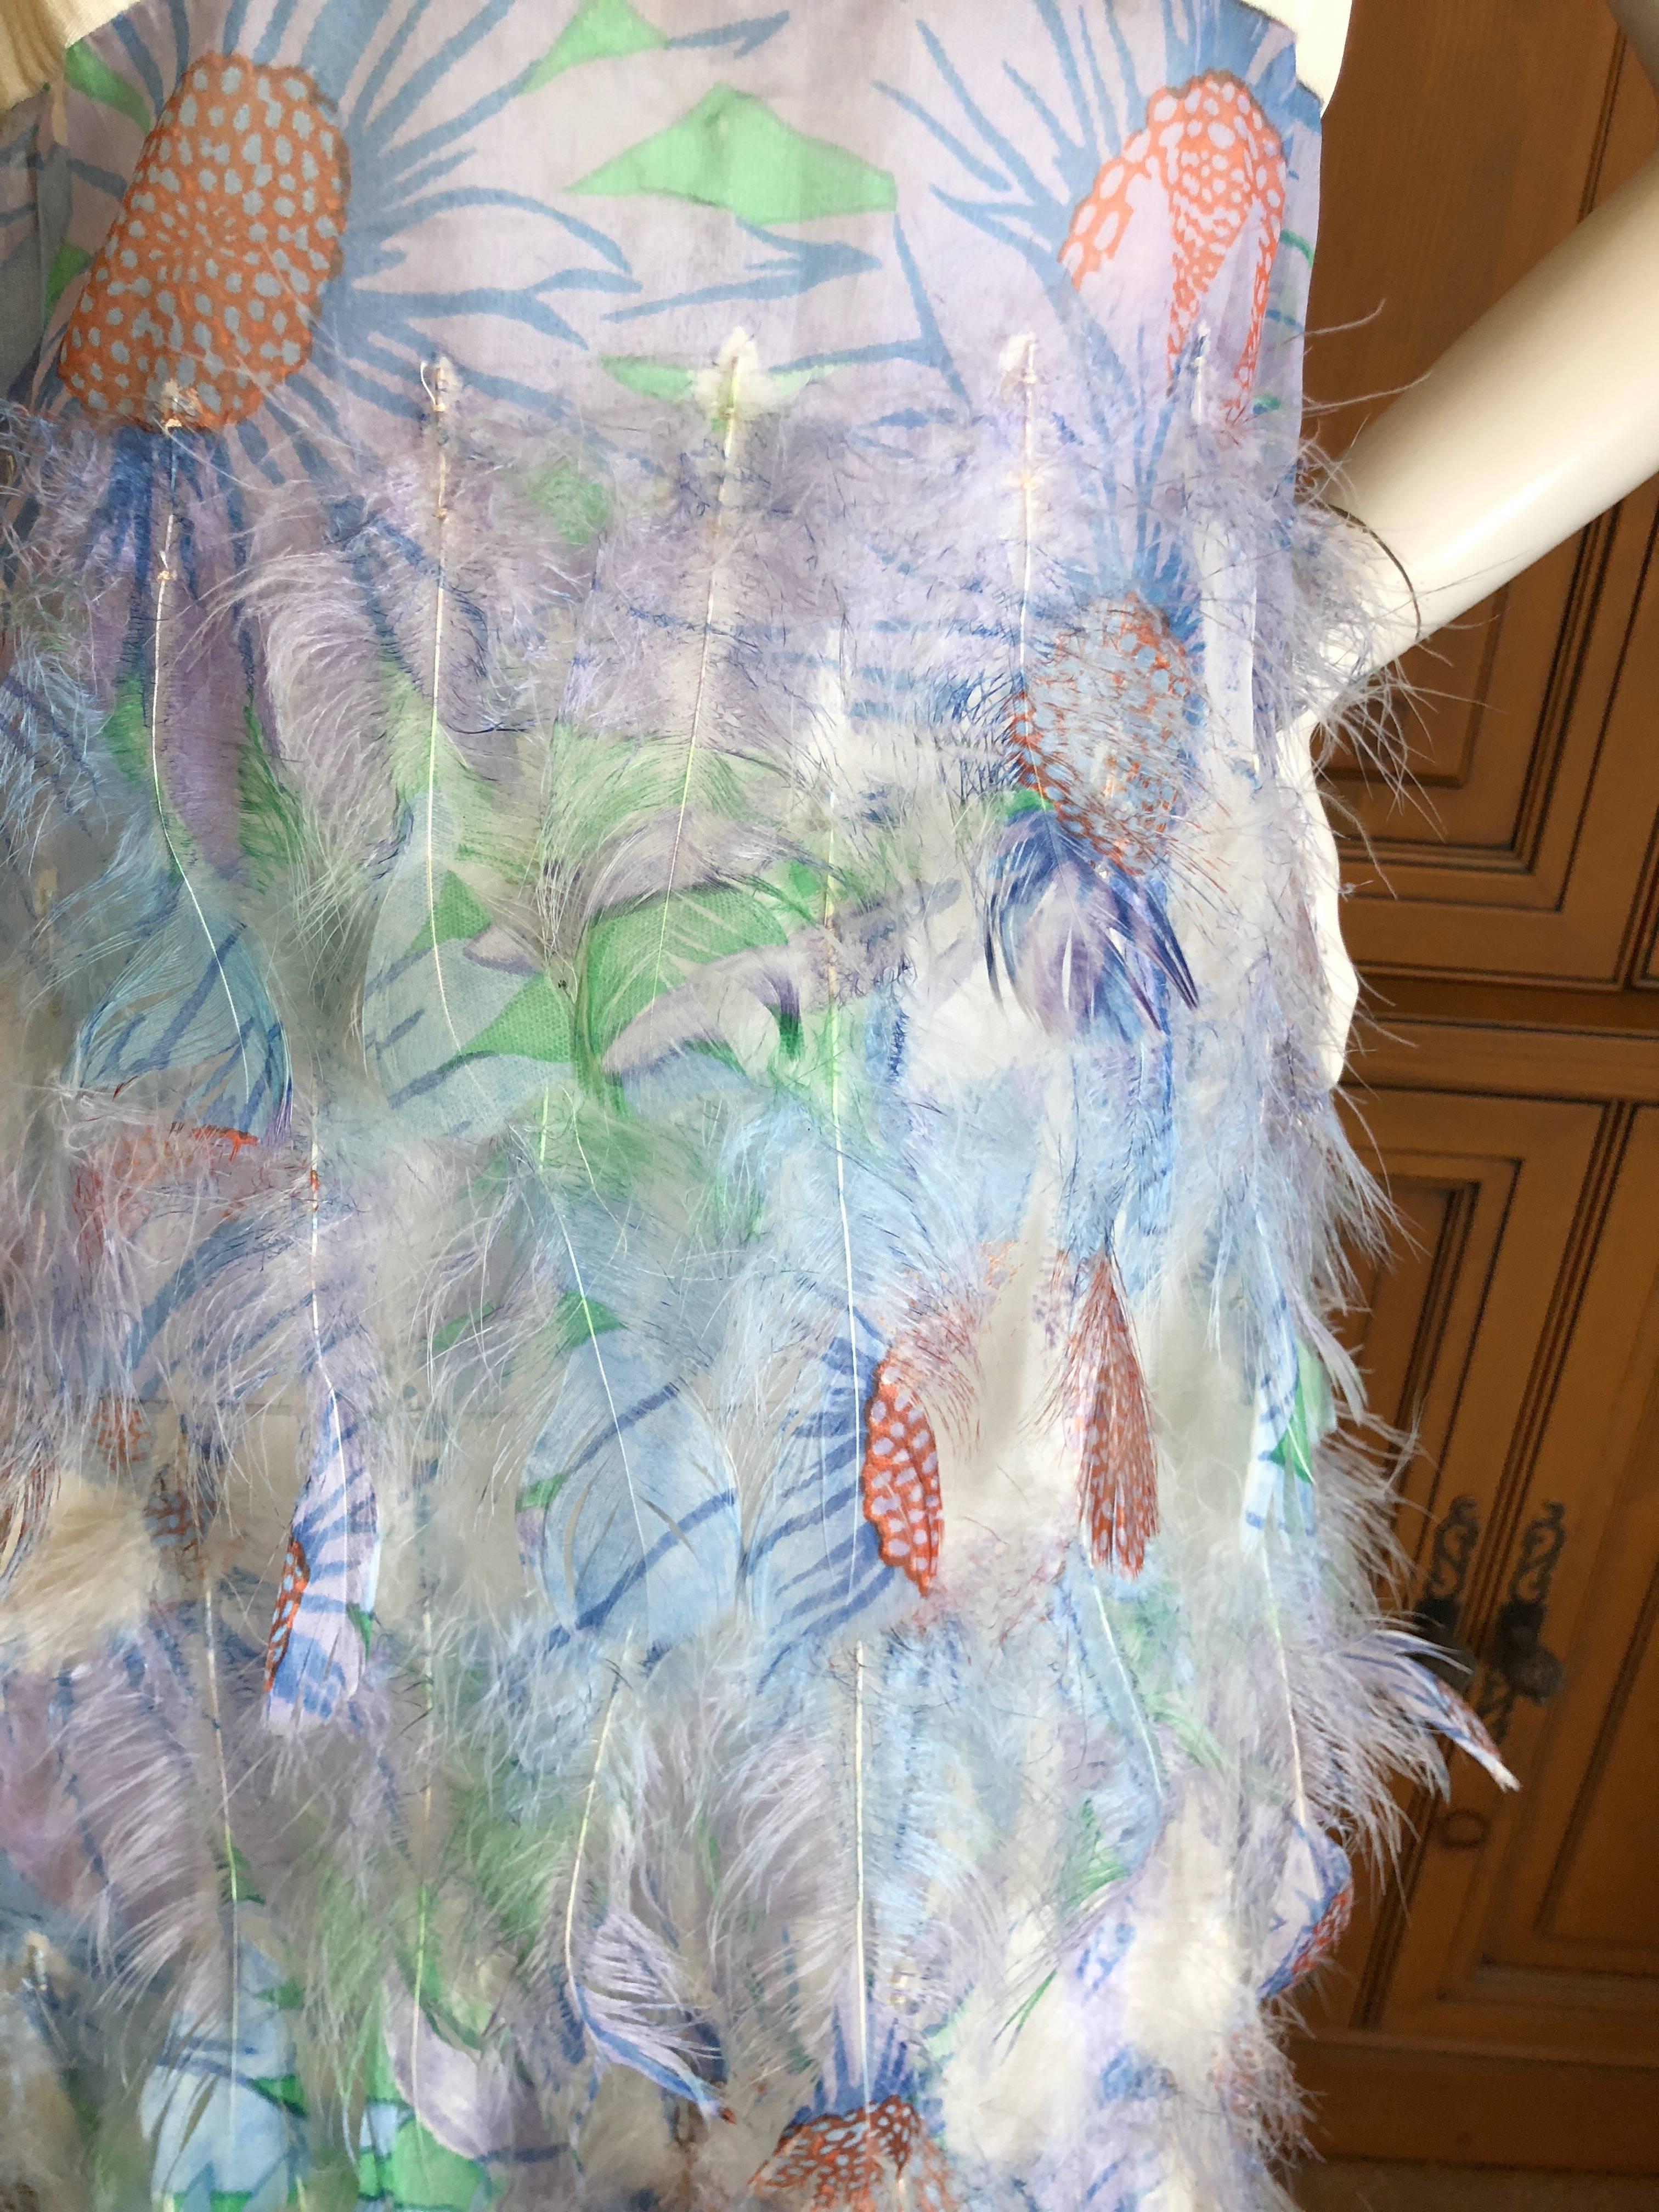 Cardinali Printed Feather Silk Empire Dress In Good Condition For Sale In Cloverdale, CA